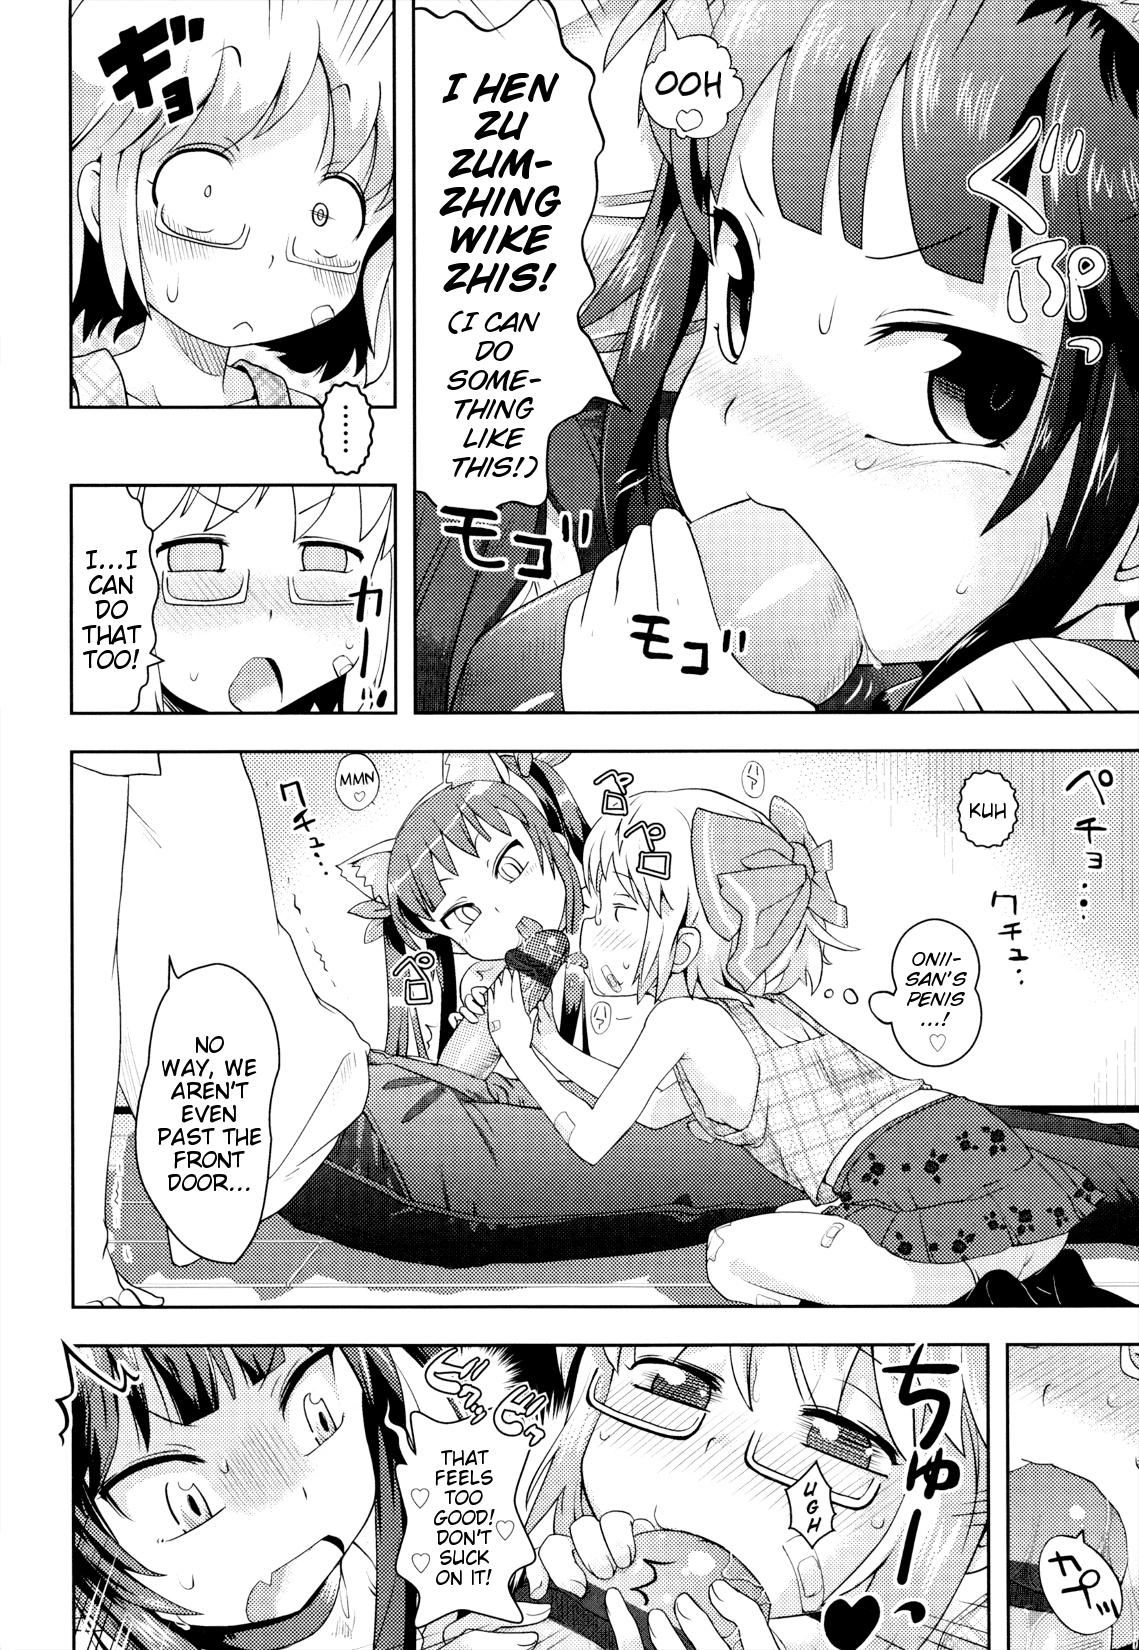 Sharing Gaw-Gaw! Imouto Security She - Page 8